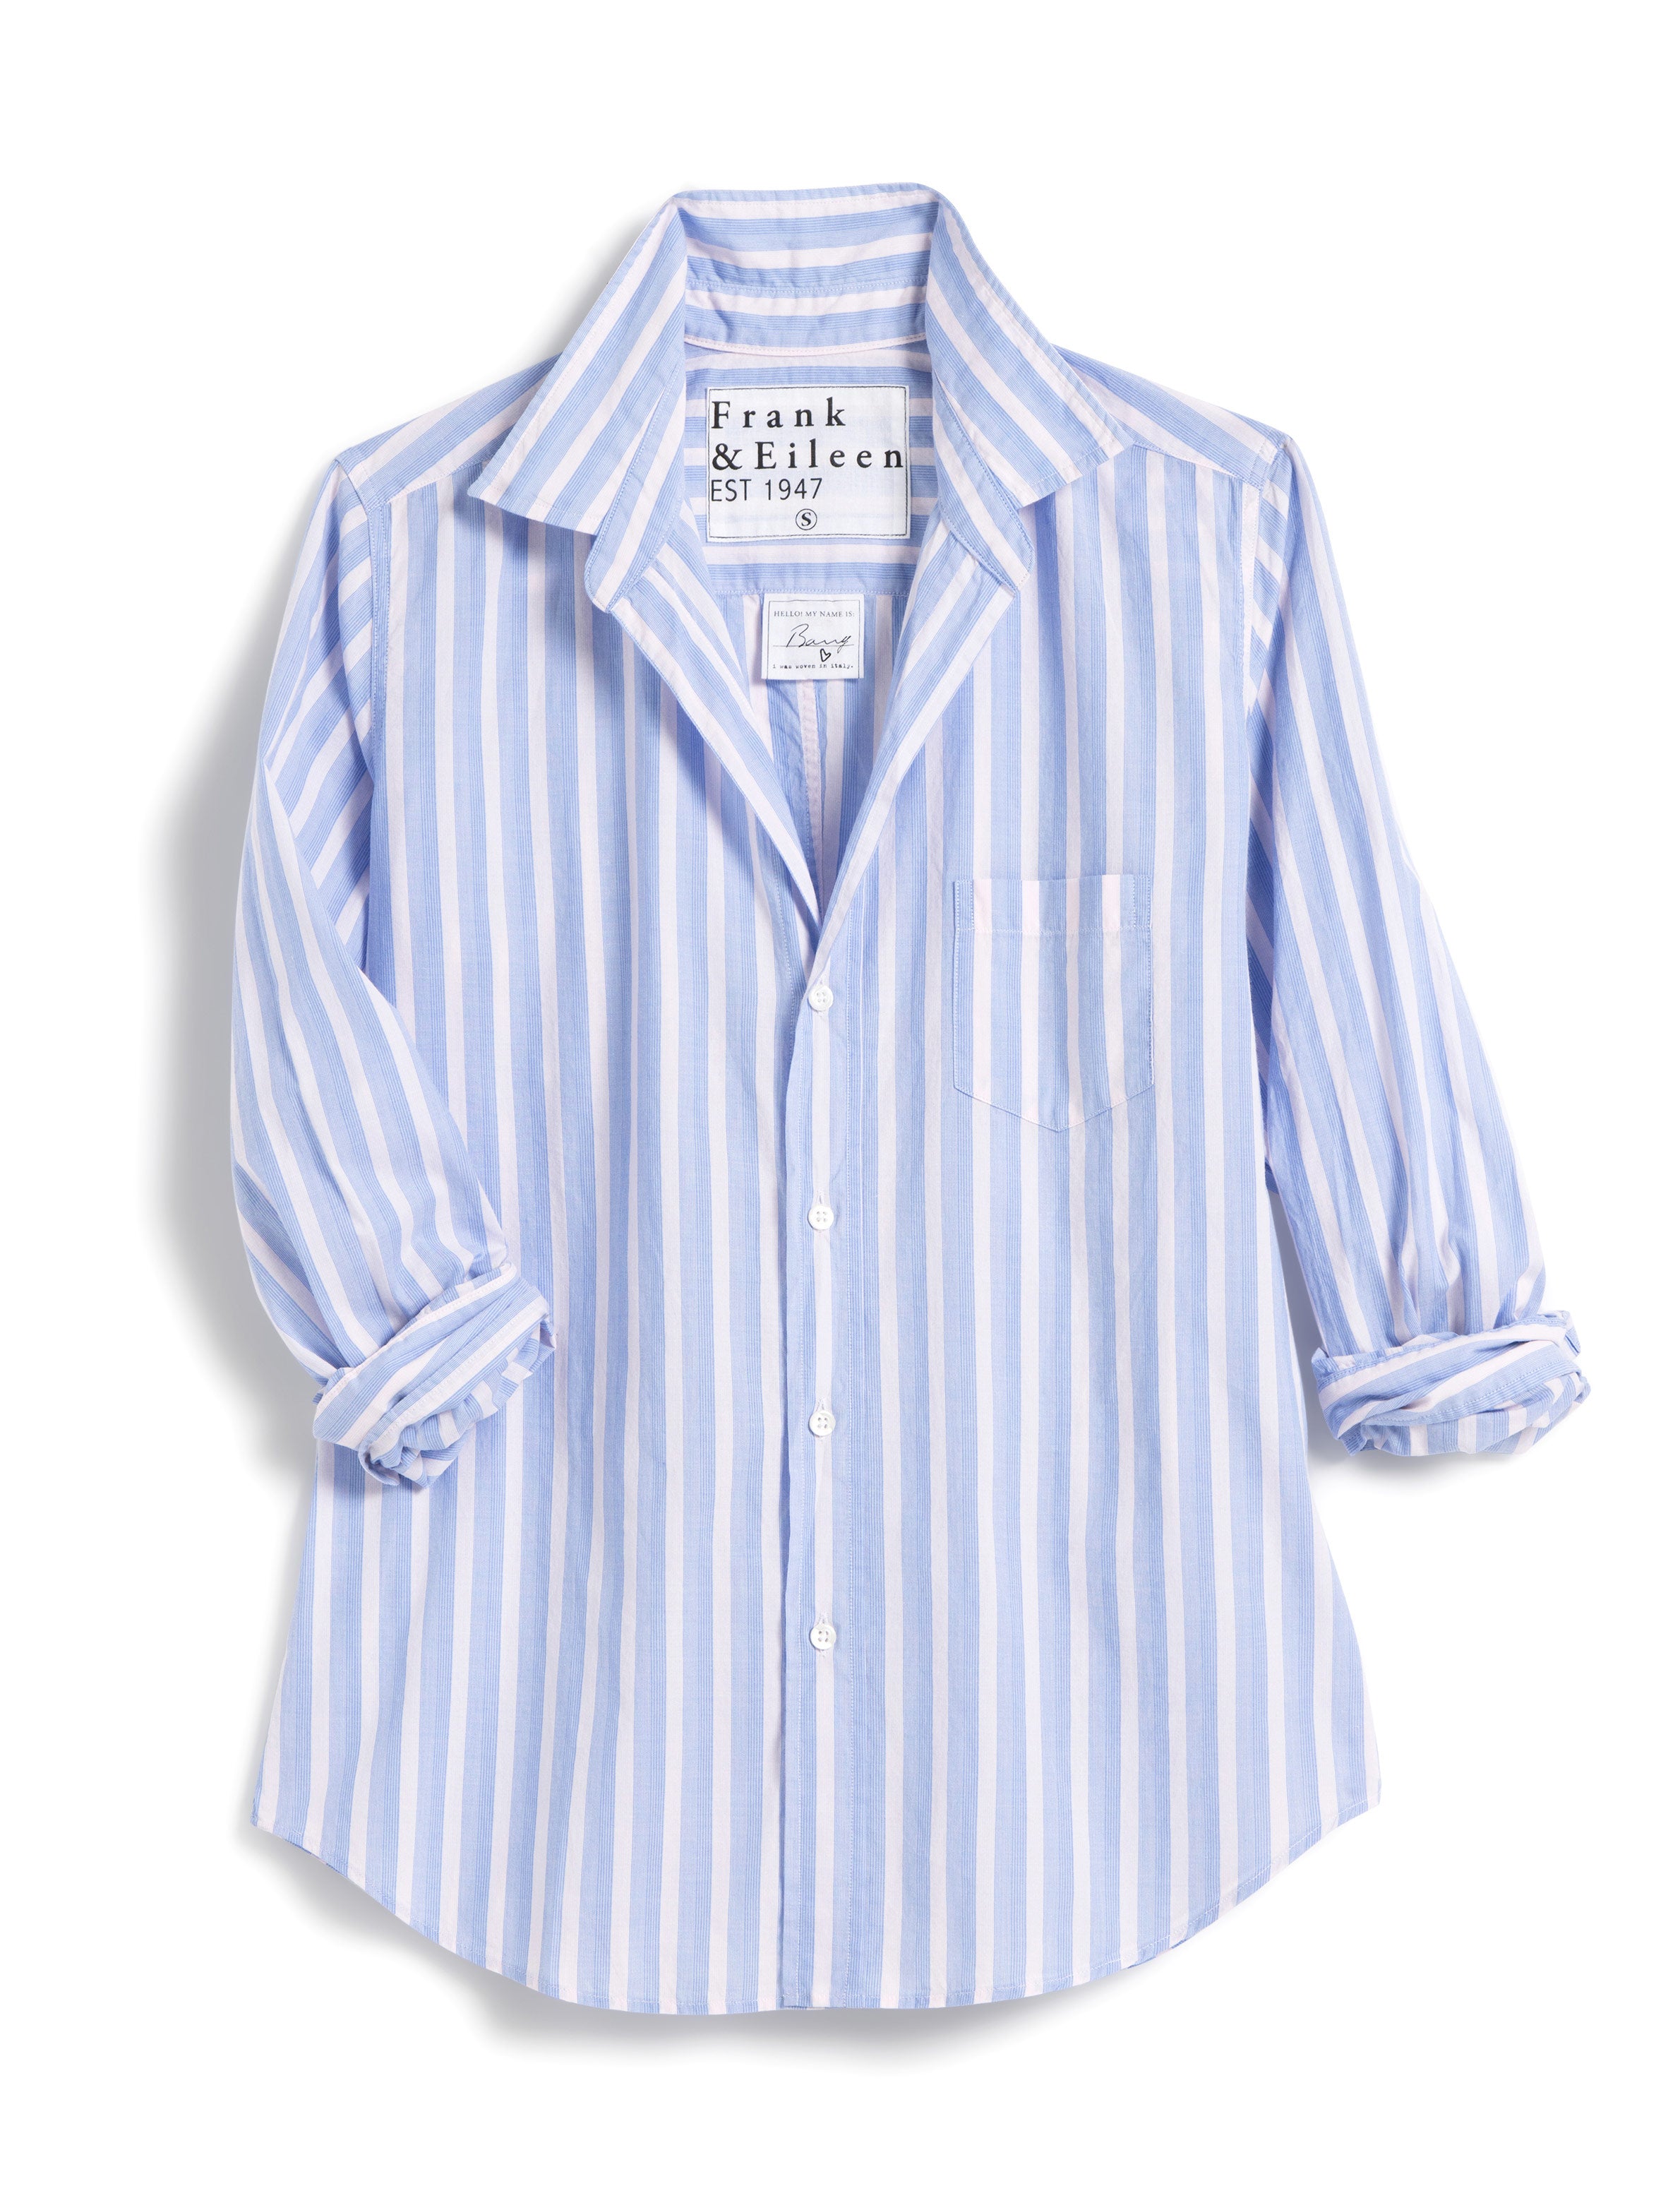 Frank & Eileen Barry Tailored Button Up Shirt in Blue, Pink Multi Stripe